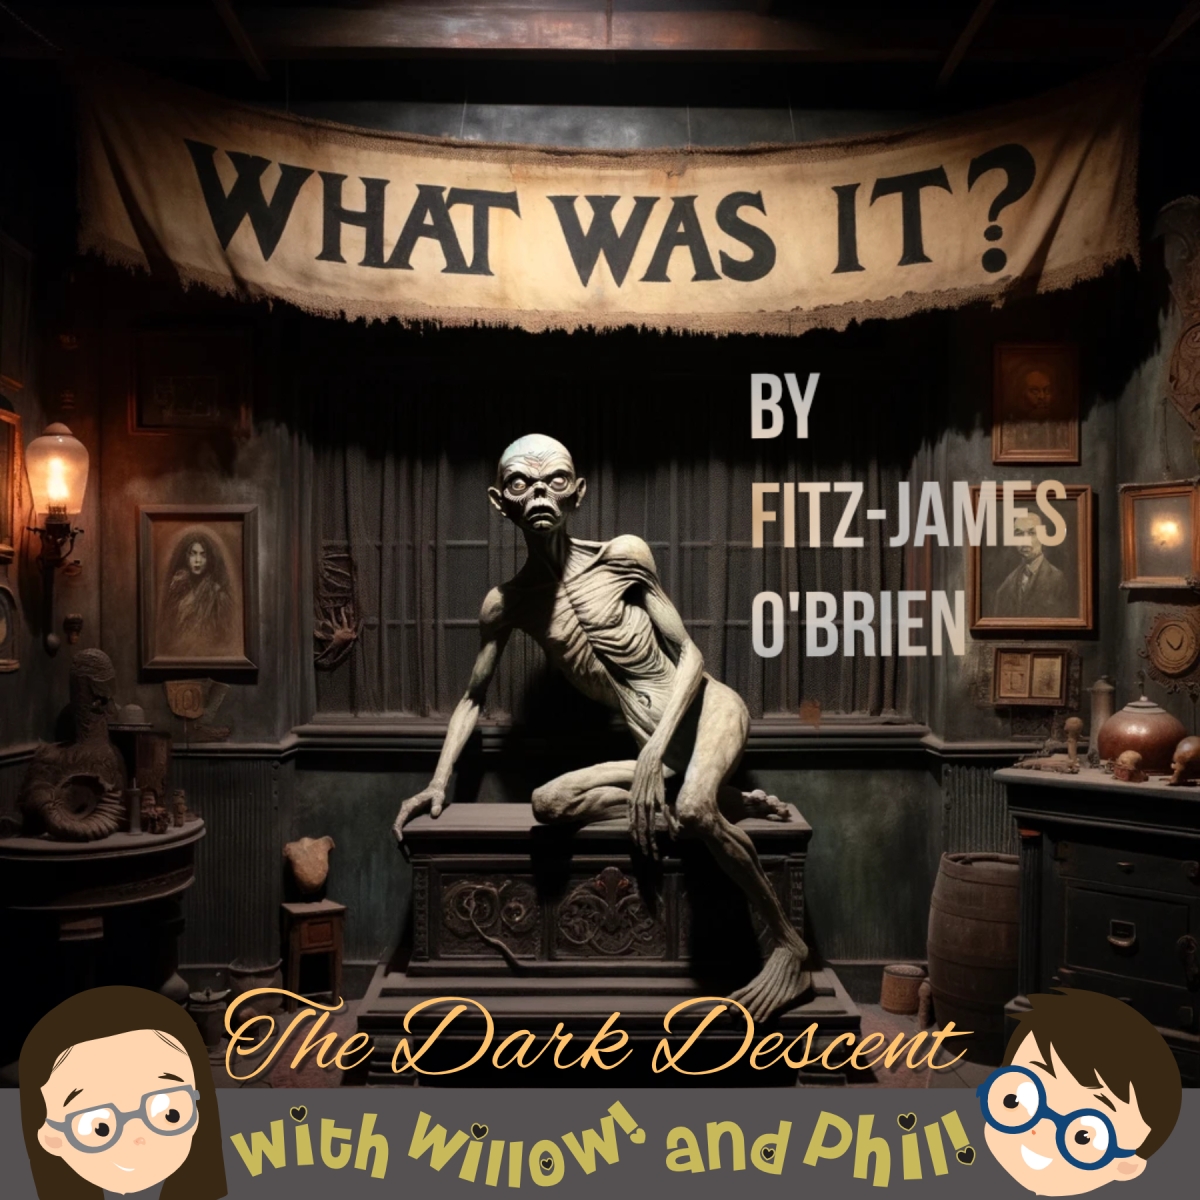 The Dark Descent – “What Was It?” by Fitz-James O’Brien